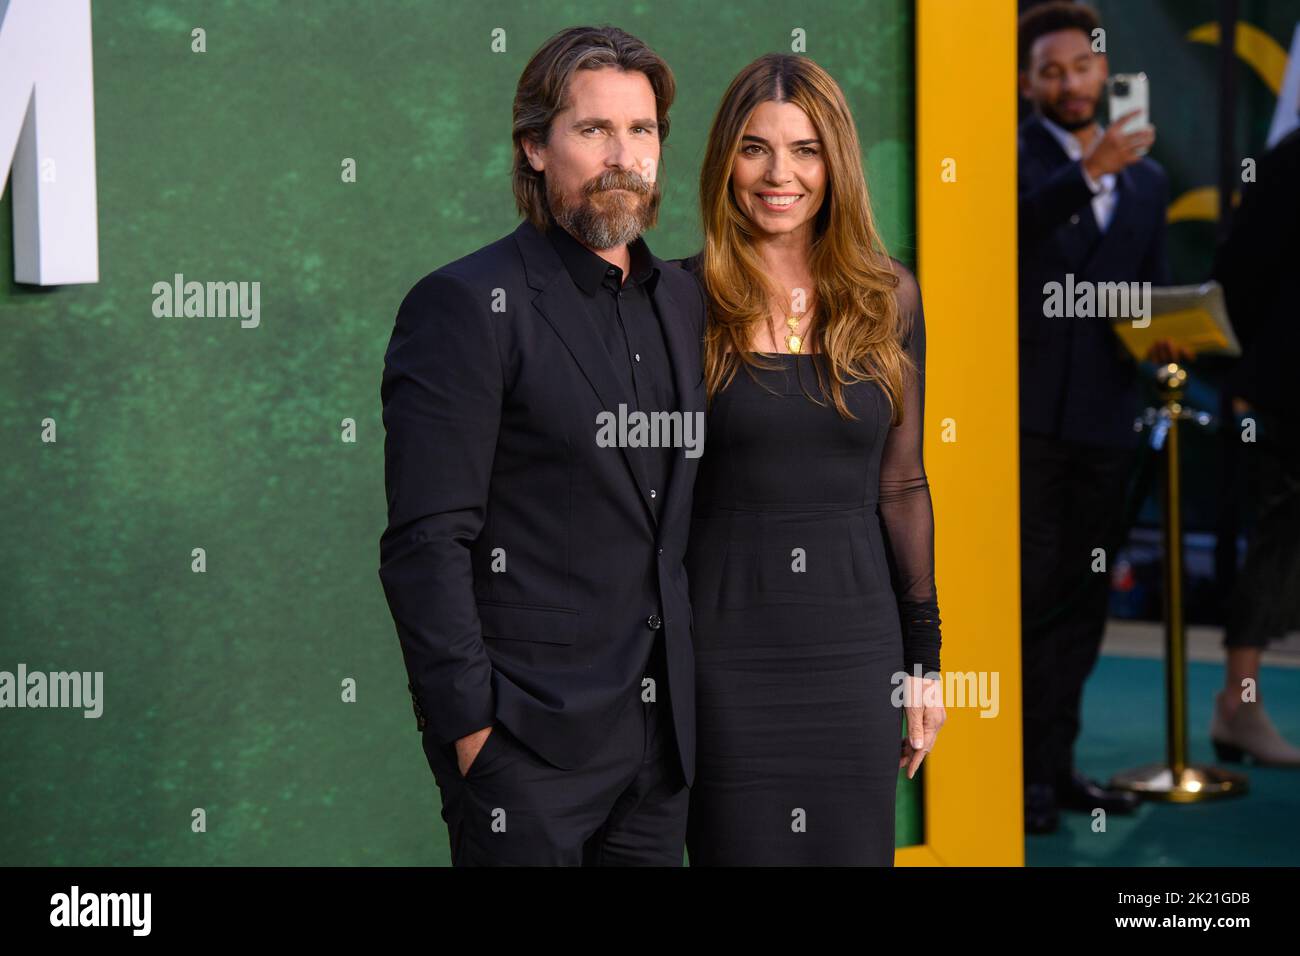 London, UK. 21 September 2022. Christian Bale and Sibi Blazic attending the European premiere of Amsterdam at the Odeon Luxe Leicester Square Cinema, London Picture date: Wednesday September 21, 2022. Photo credit should read: Matt Crossick/Empics/Alamy Live News Stock Photo